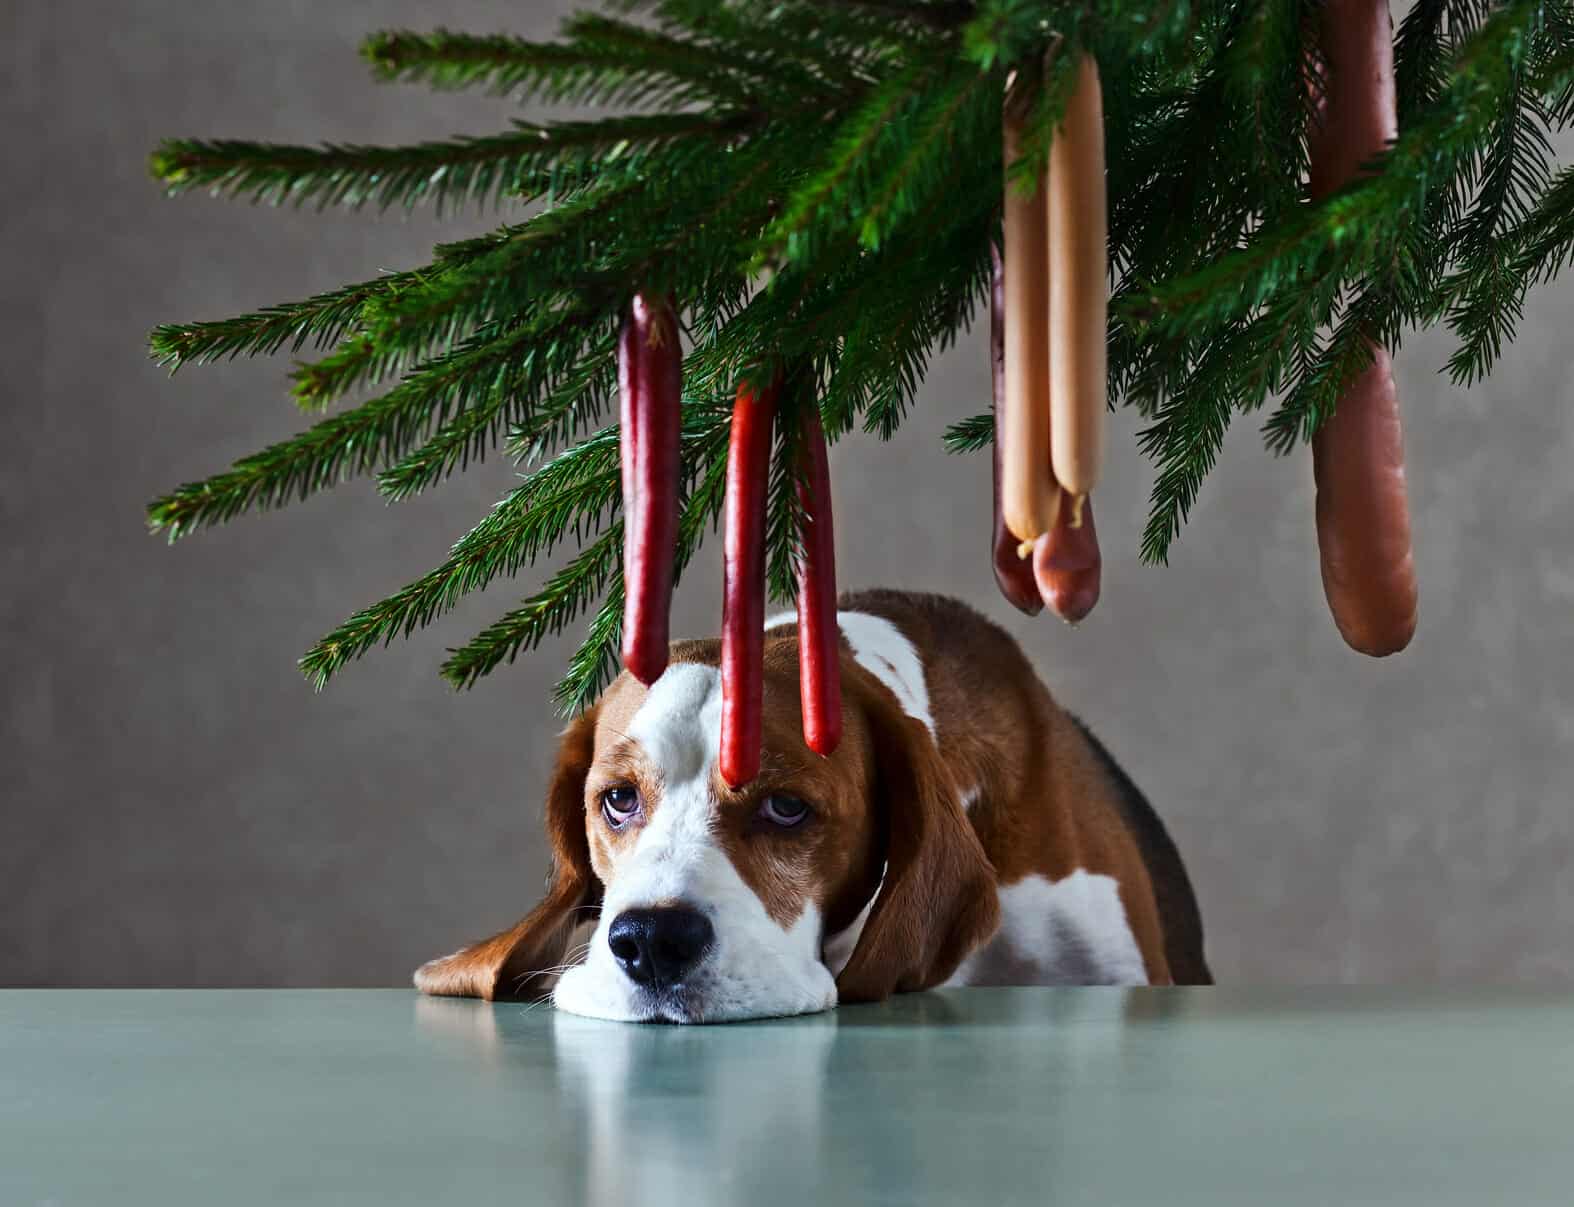 Sad beagle under a Christmas tree decorated with hanging sausages.